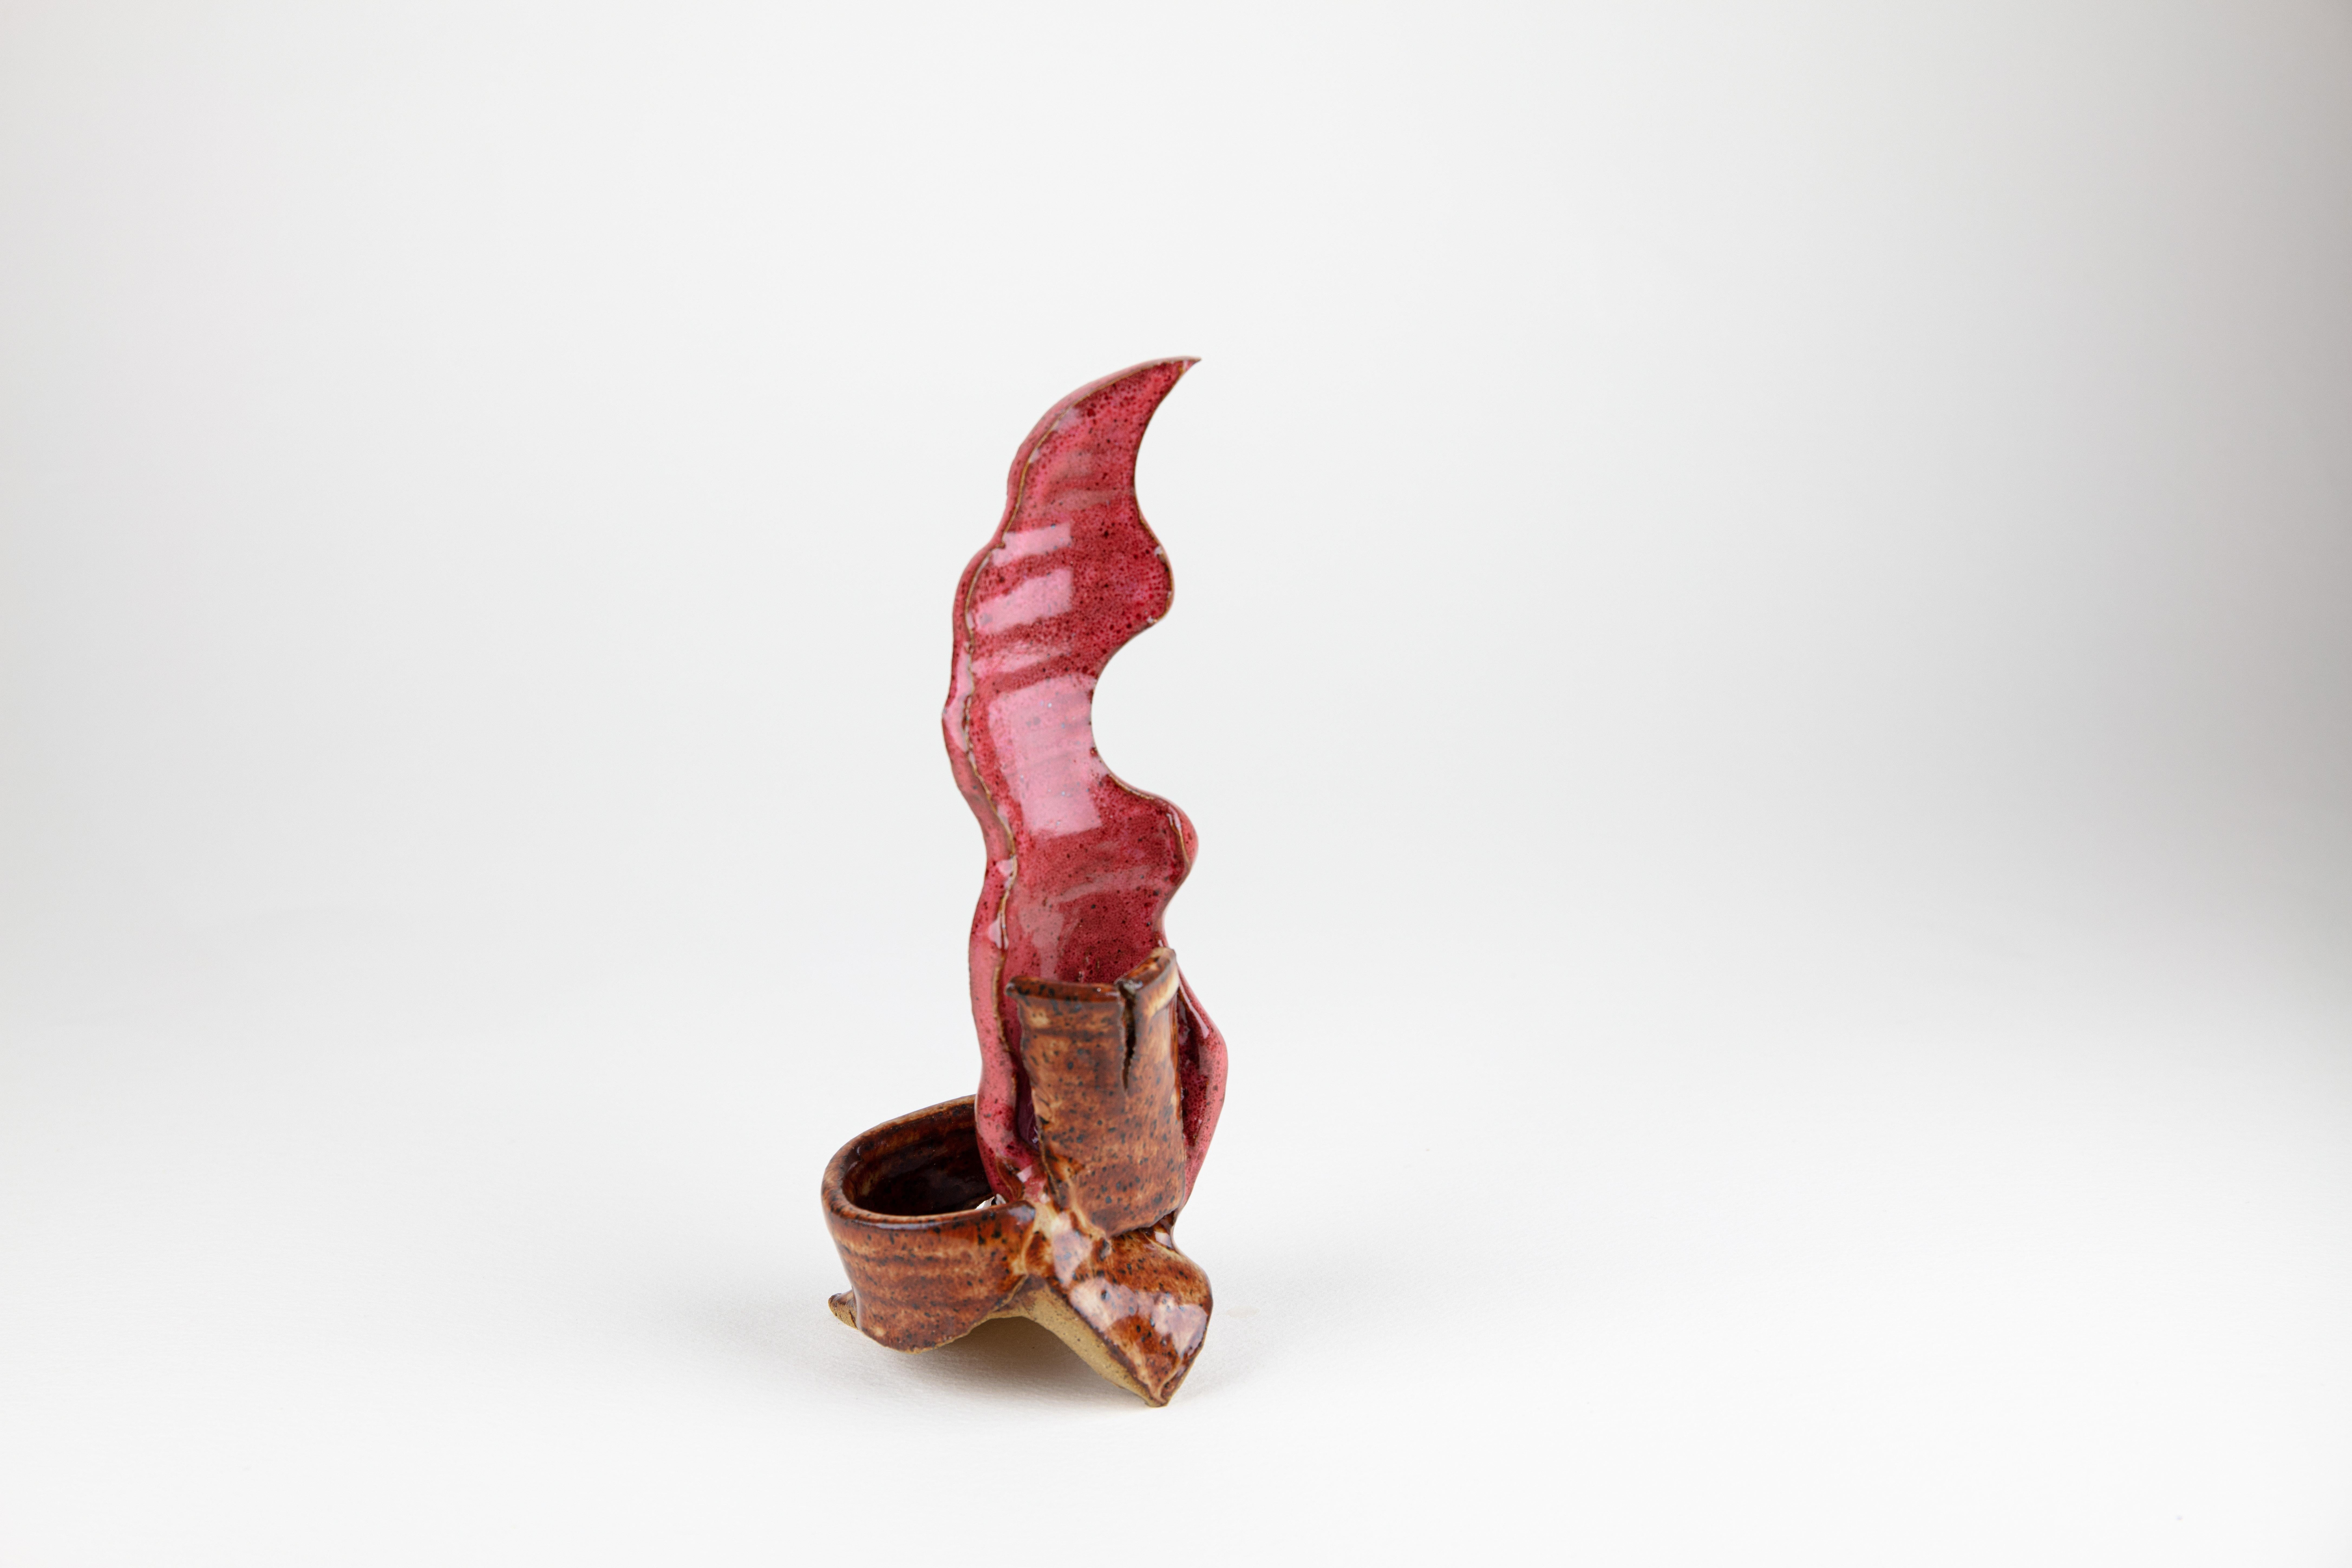 Shoots 2, Abstract ceramic sculpture, red and brown - Sculpture by Rachelle Krieger